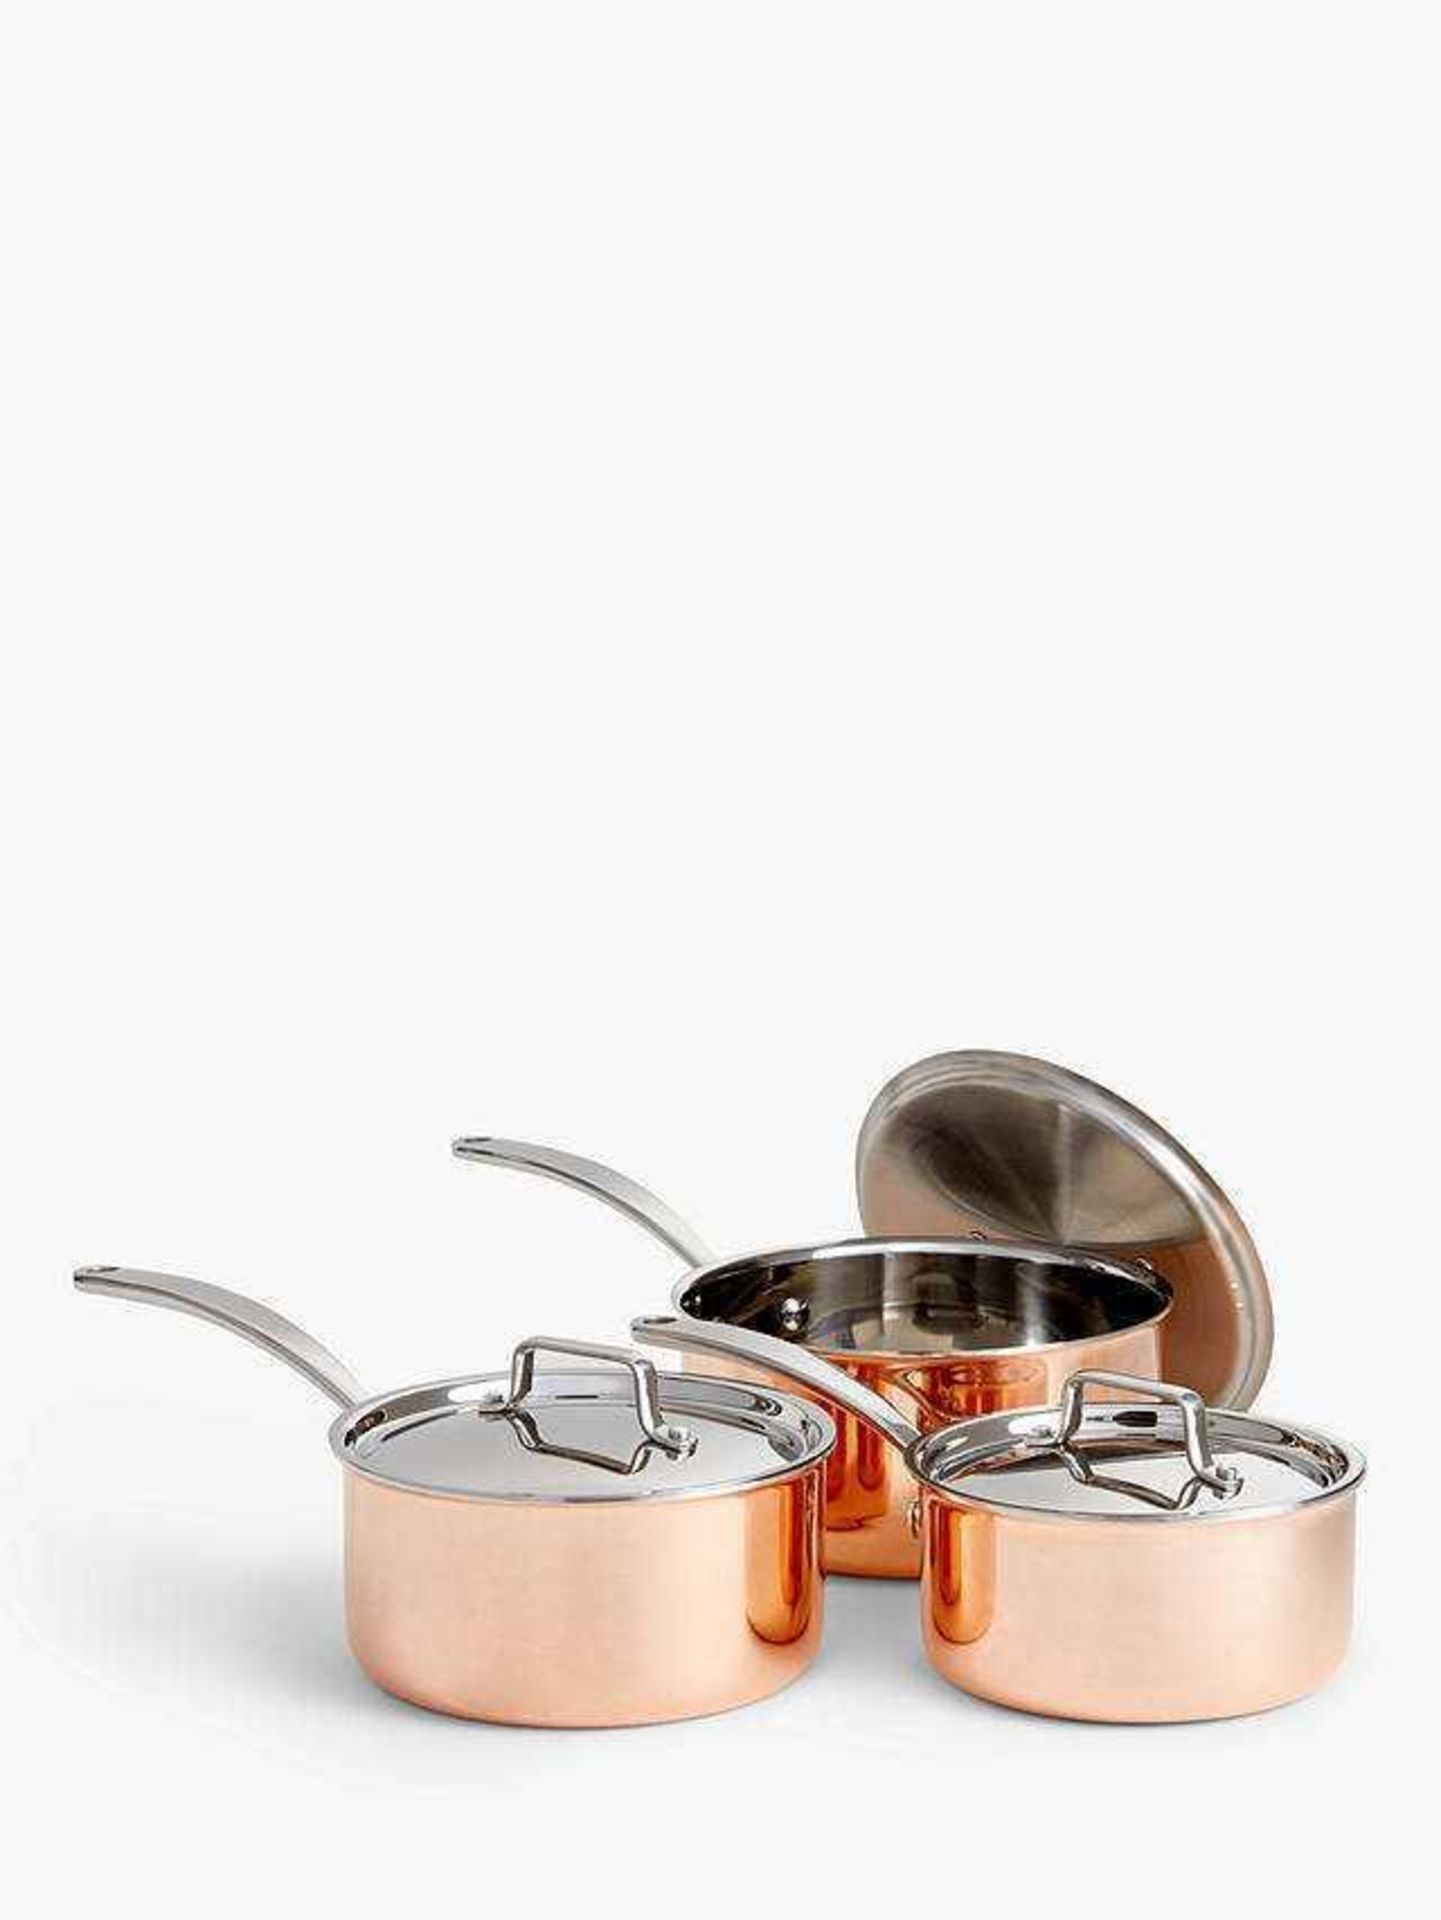 (At) RRP £395 Lot To Contain 1 X John Lewis Stockpot With Lid 1 X John Lewis SautÃ© Pan With Lid 1 X - Image 11 of 12